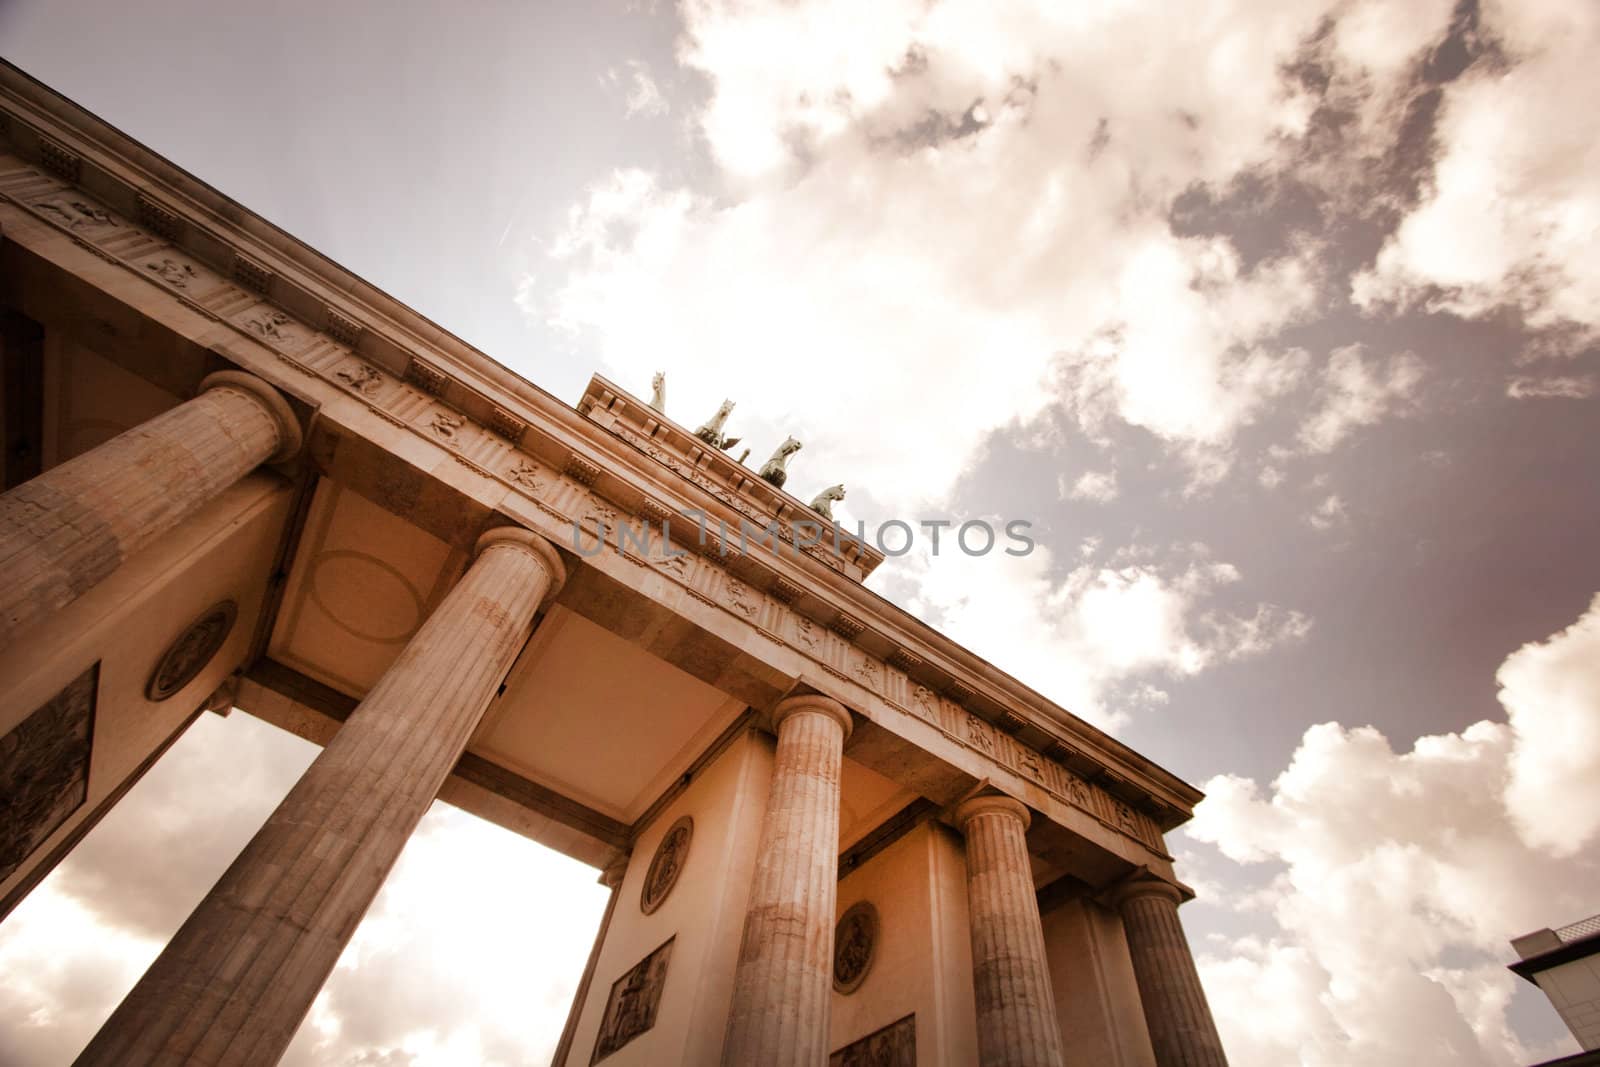 Low angle view looking up the stonework of the Brandenberg Gate in Berlin towards the statue of the Quadriga on the top against a cloudy sky